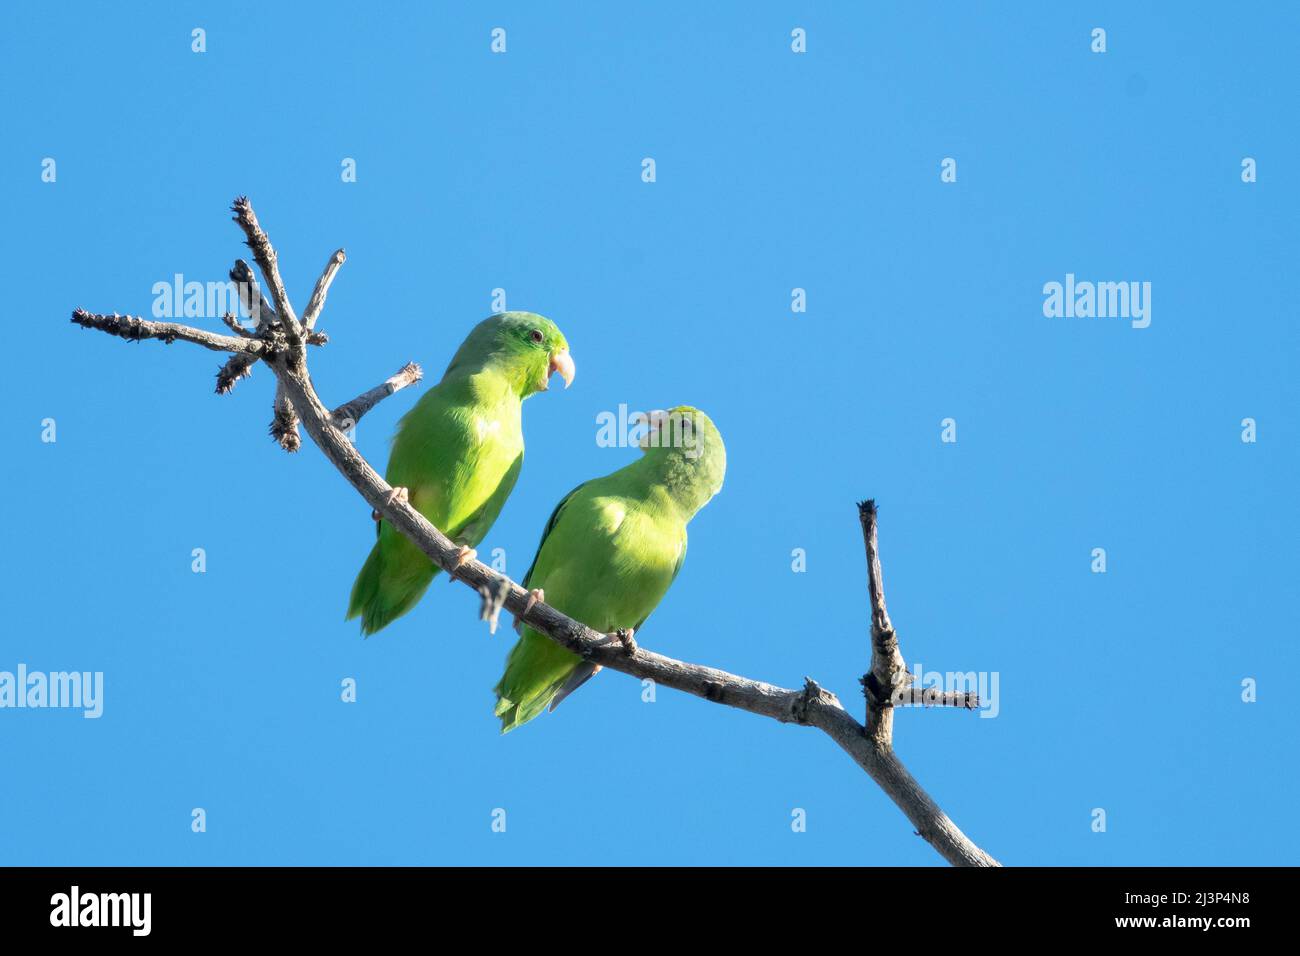 Two Green-rumped Parrotlets (parakeets), Forpus passerinus, having a conversation and playing. Two cute birds talking and having a conversation. Stock Photo